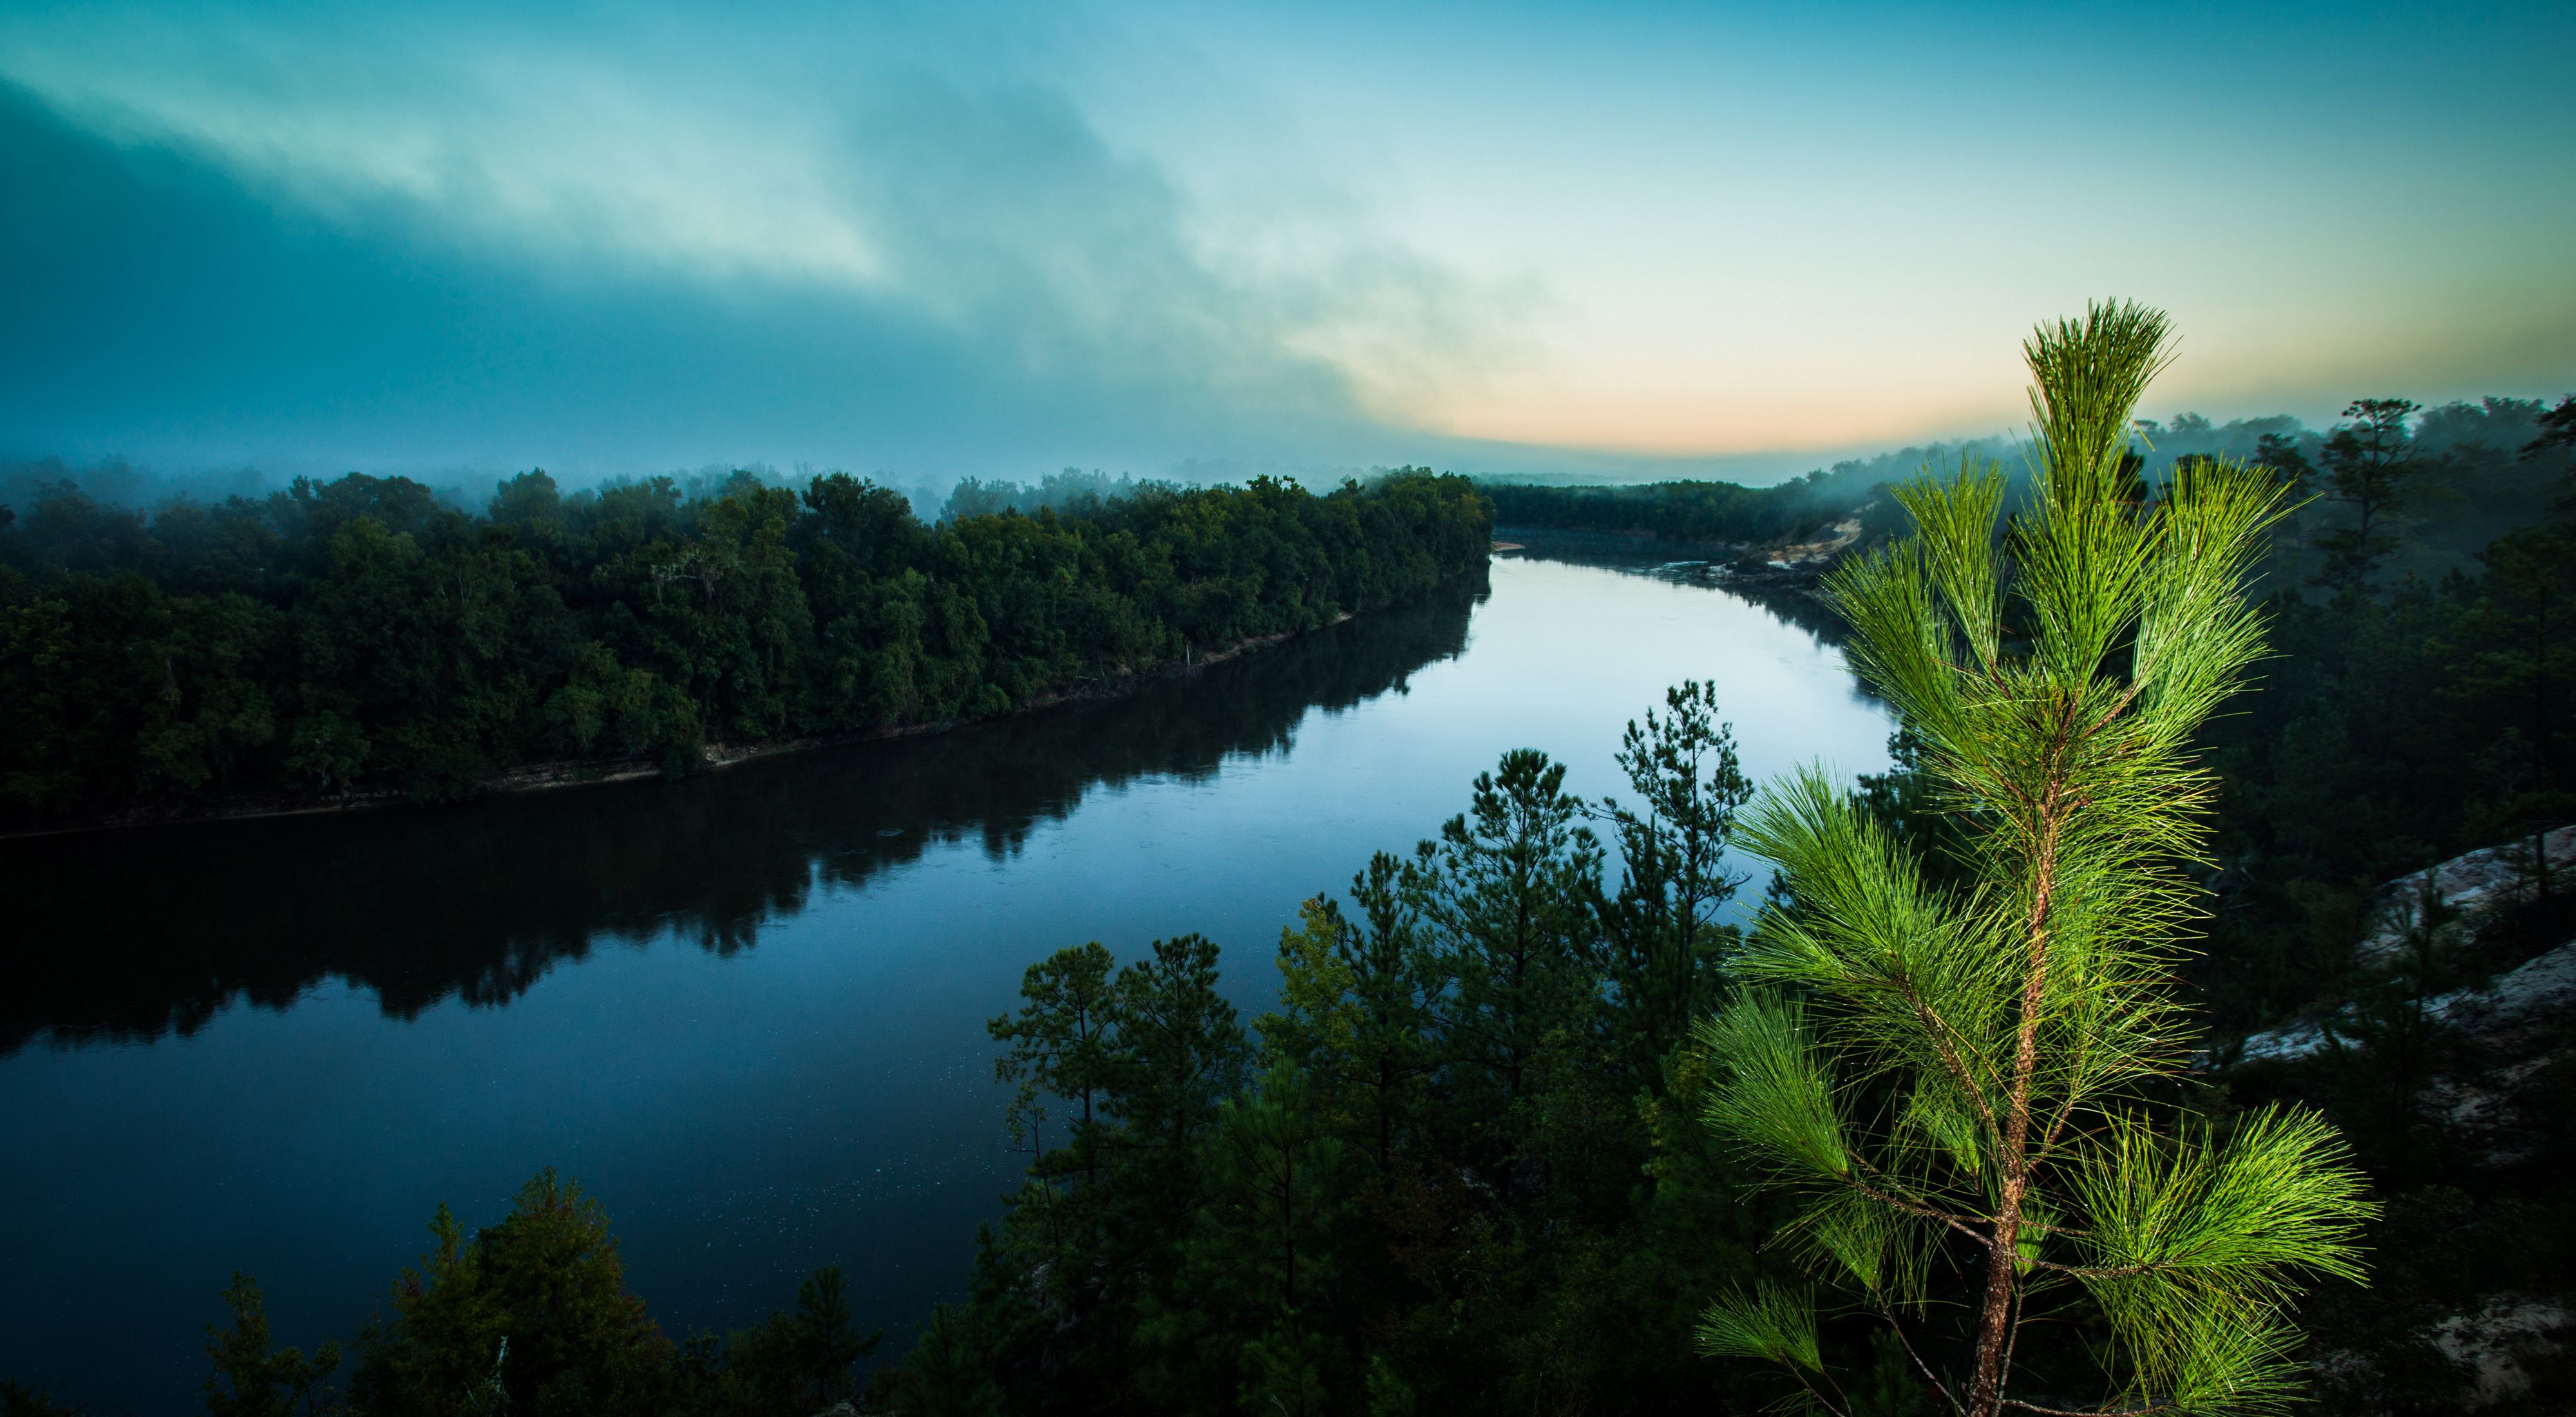 A wide river bends through a forested landscape with trees along the banks and a misty blue sunset.